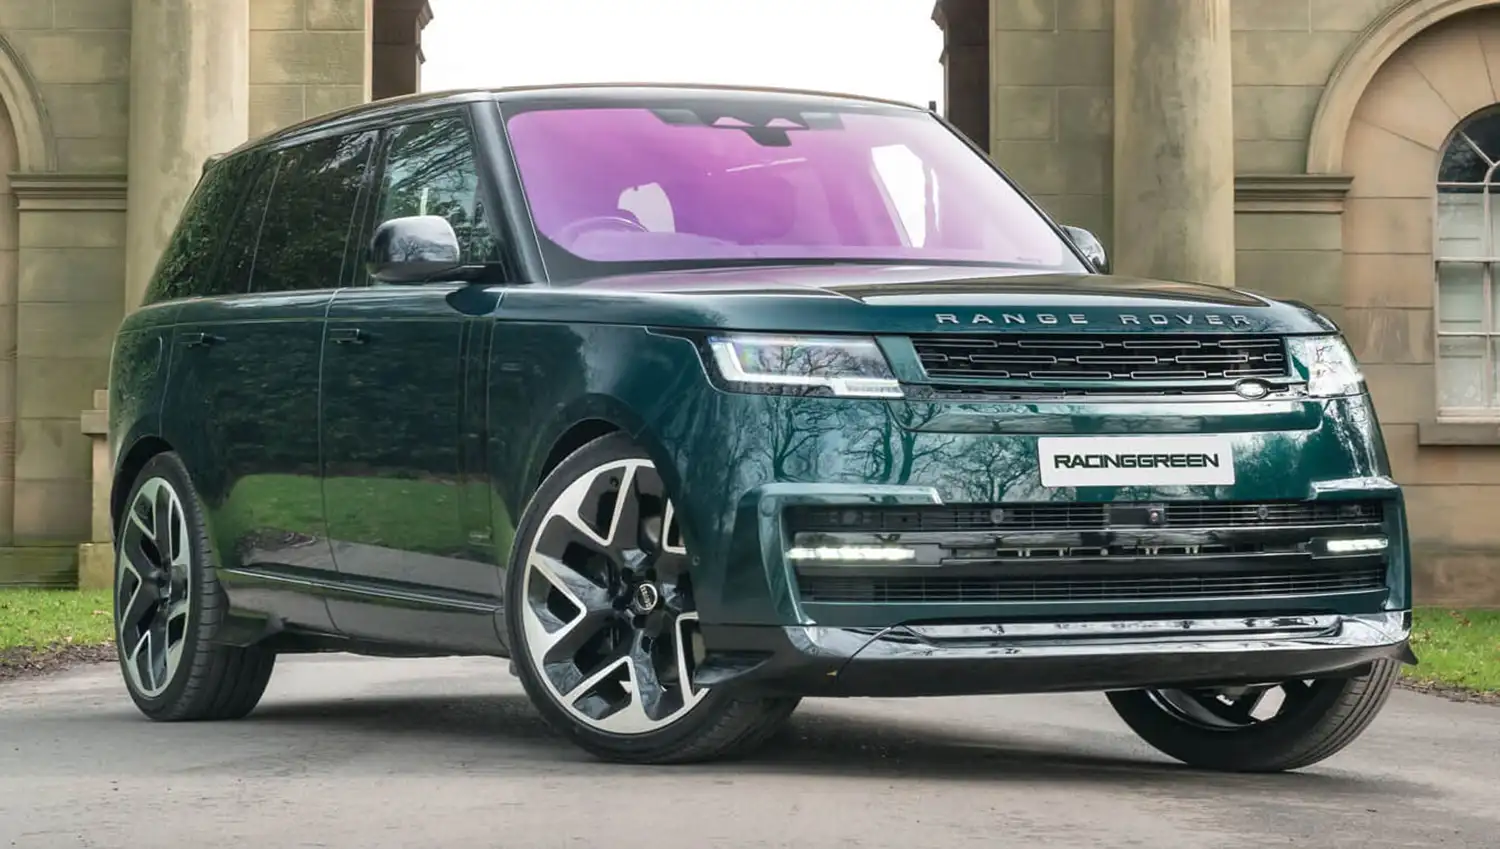 range-rover-lwb-fintail-edition-by-racing-green-automotive